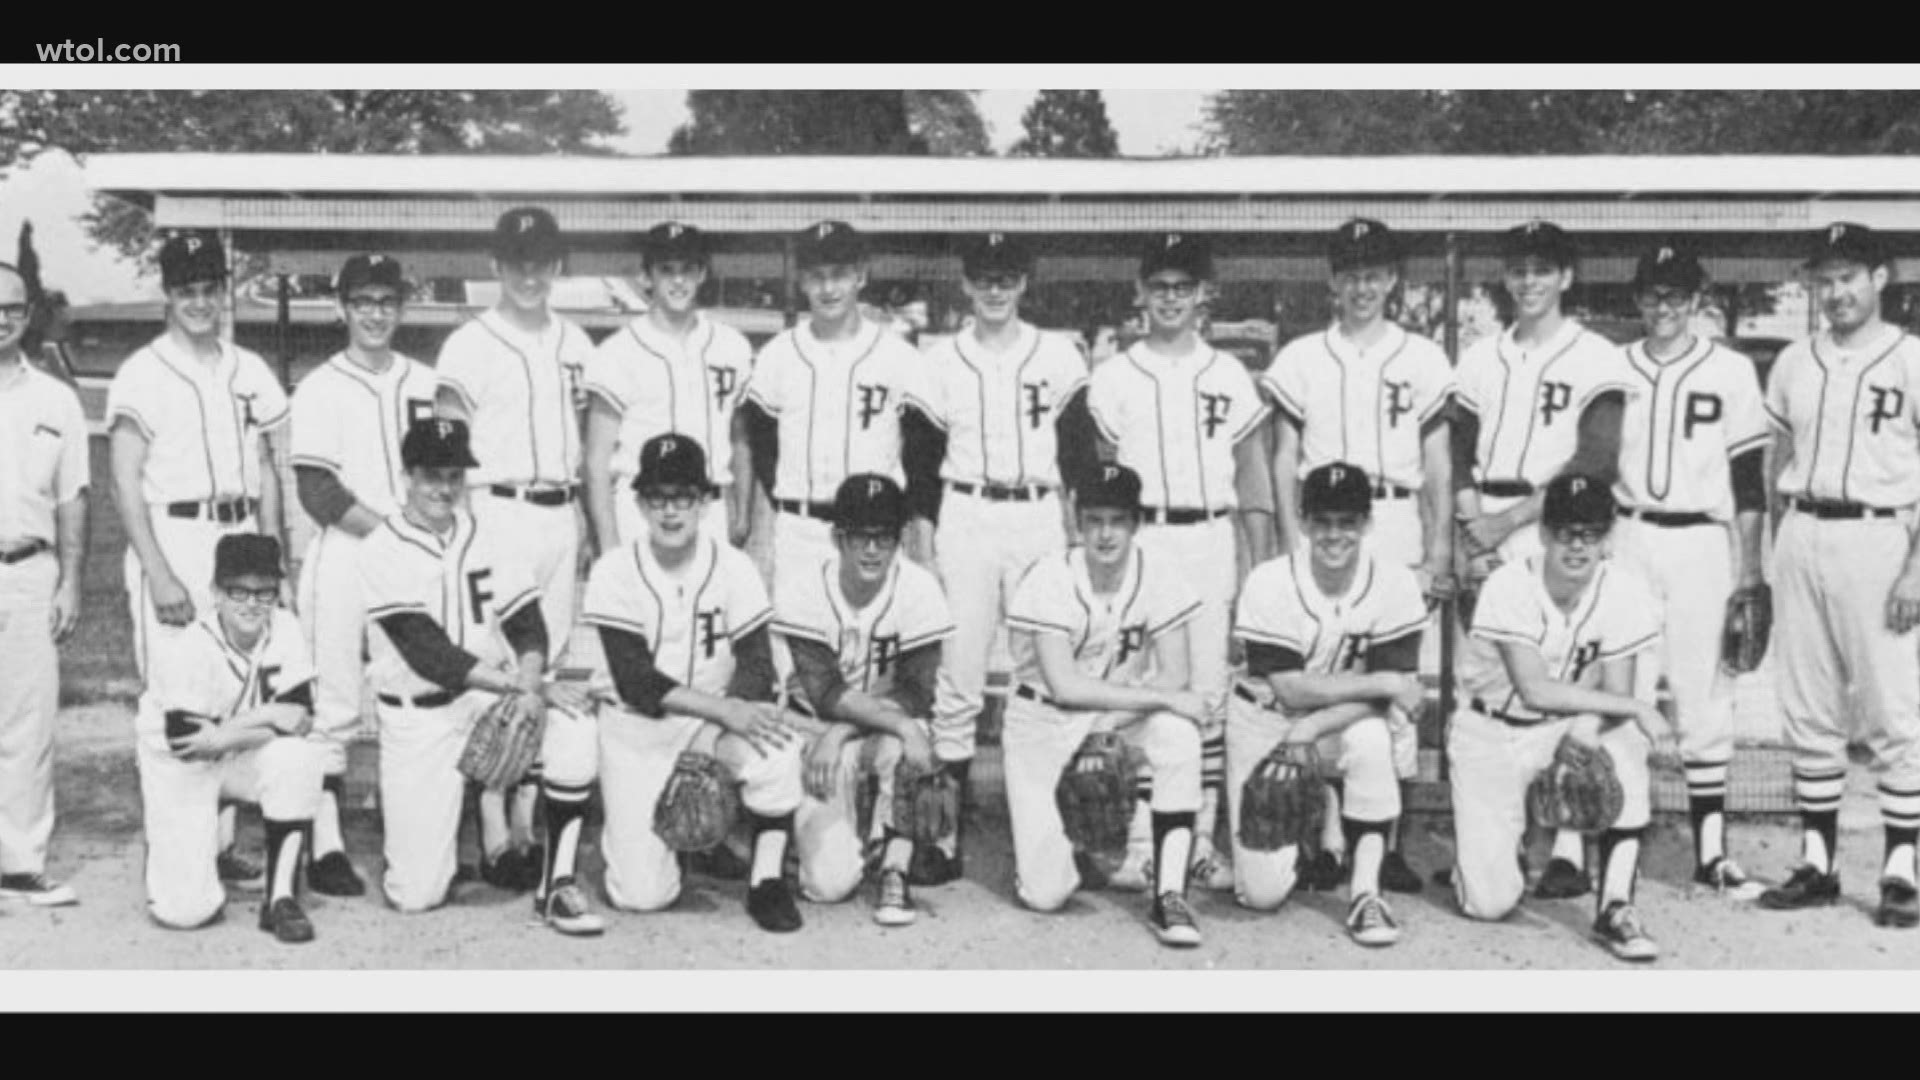 Selgo was a member of the Pettisville baseball team that made it to the state final four back in 1970.